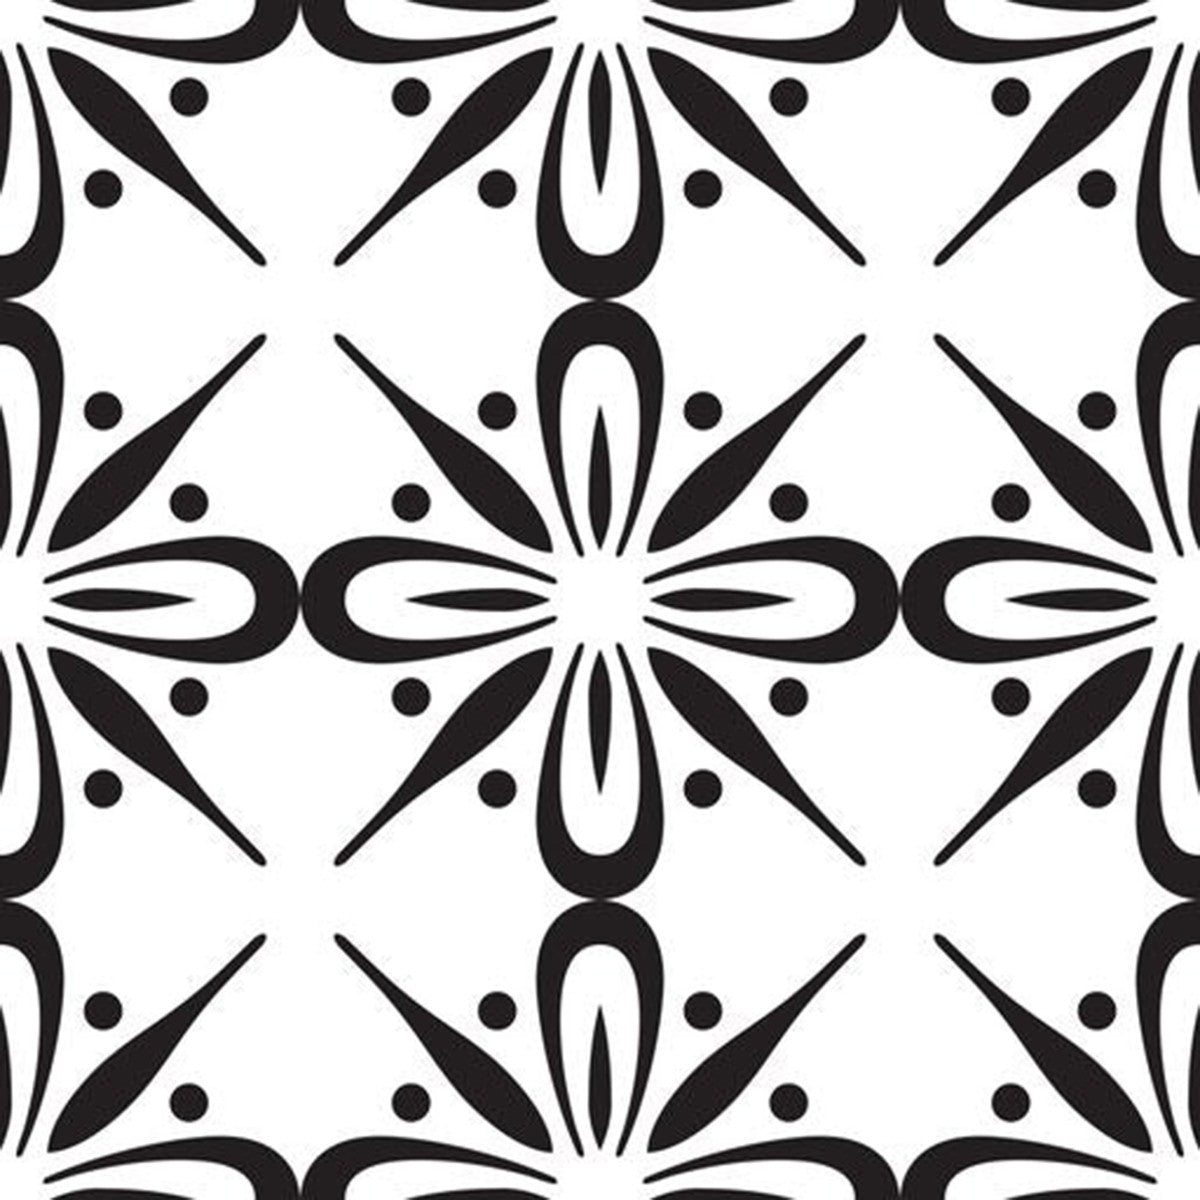 4" X 4" Black and White Quattra Peel and Stick Removable Tiles